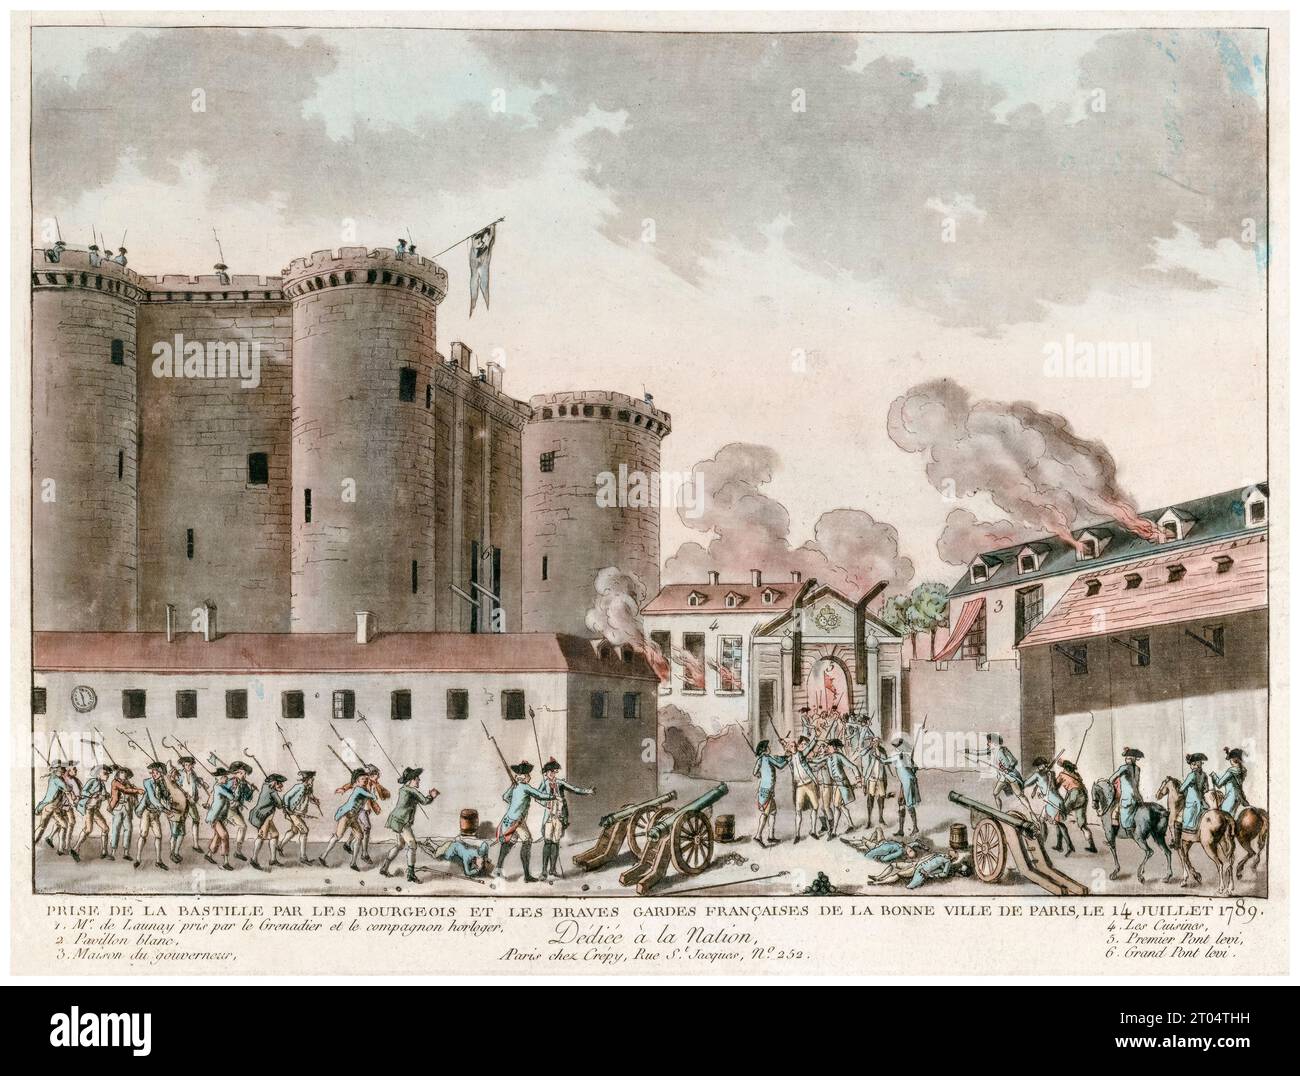 Storming of the Bastille by the bourgeois and the brave French Guards of the good city of Paris, July 14th 1789, French revolution, hand coloured engraving, 1789 Stock Photo